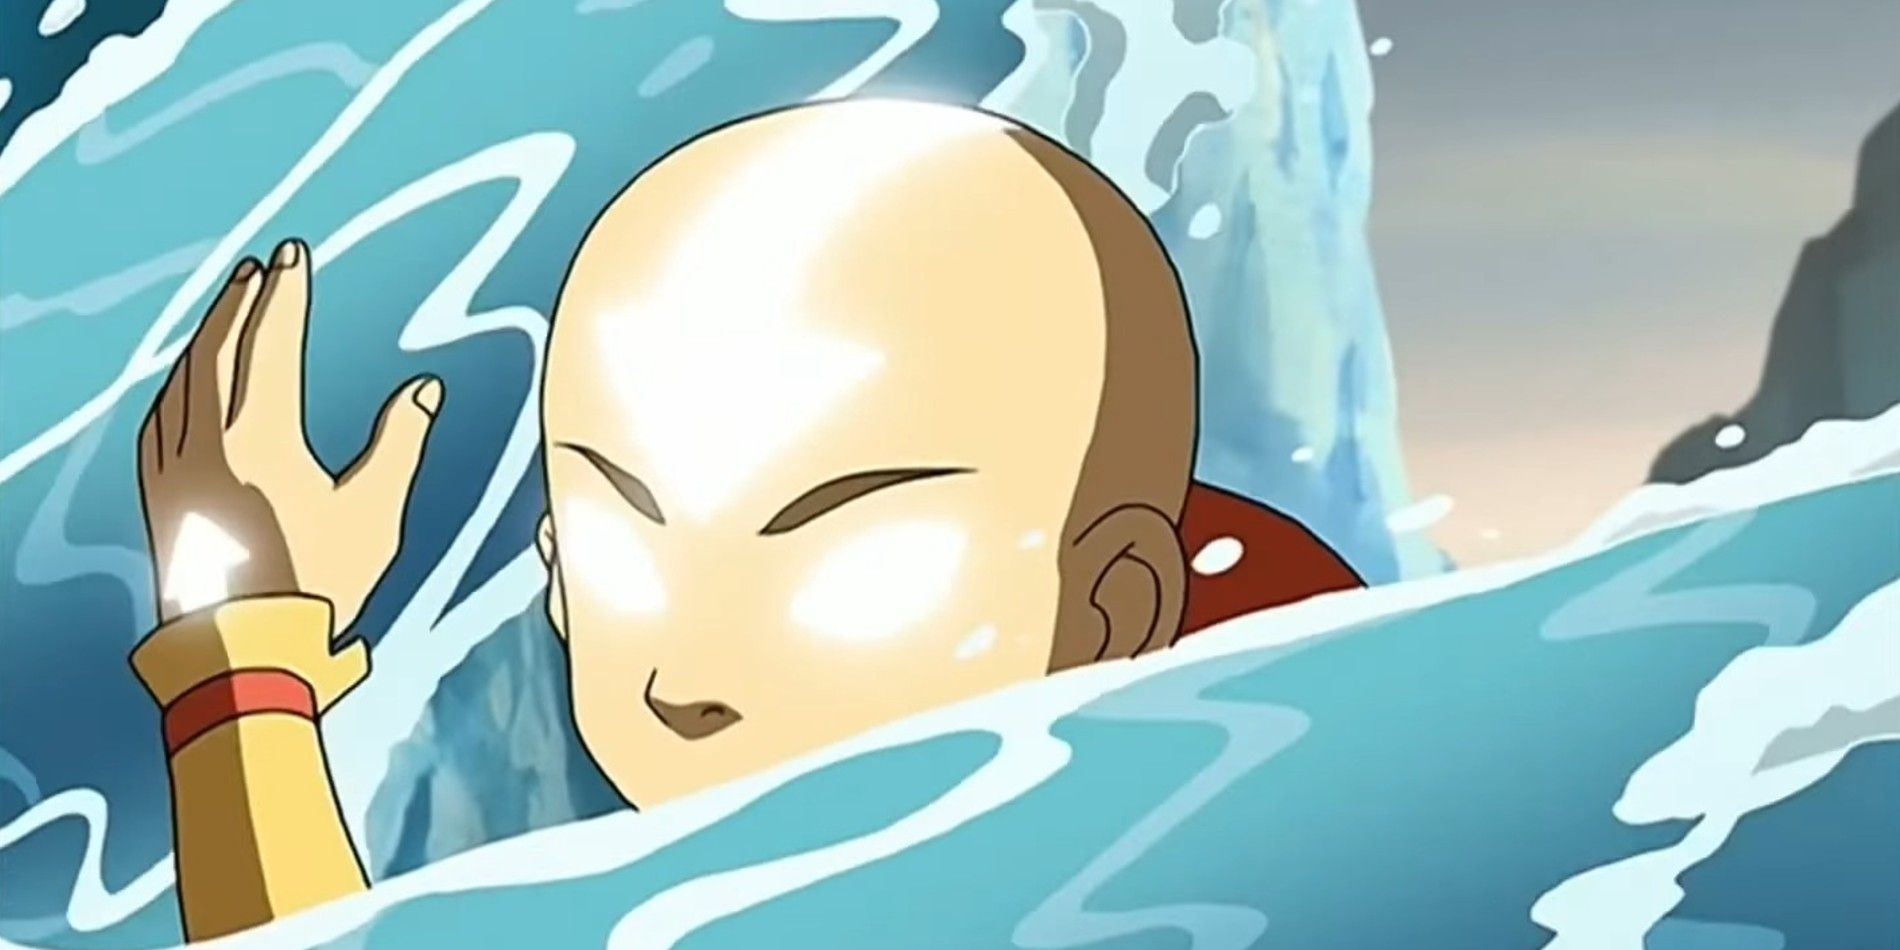 Aang using waterbending against Prince Zuko in the avatar state for the first time